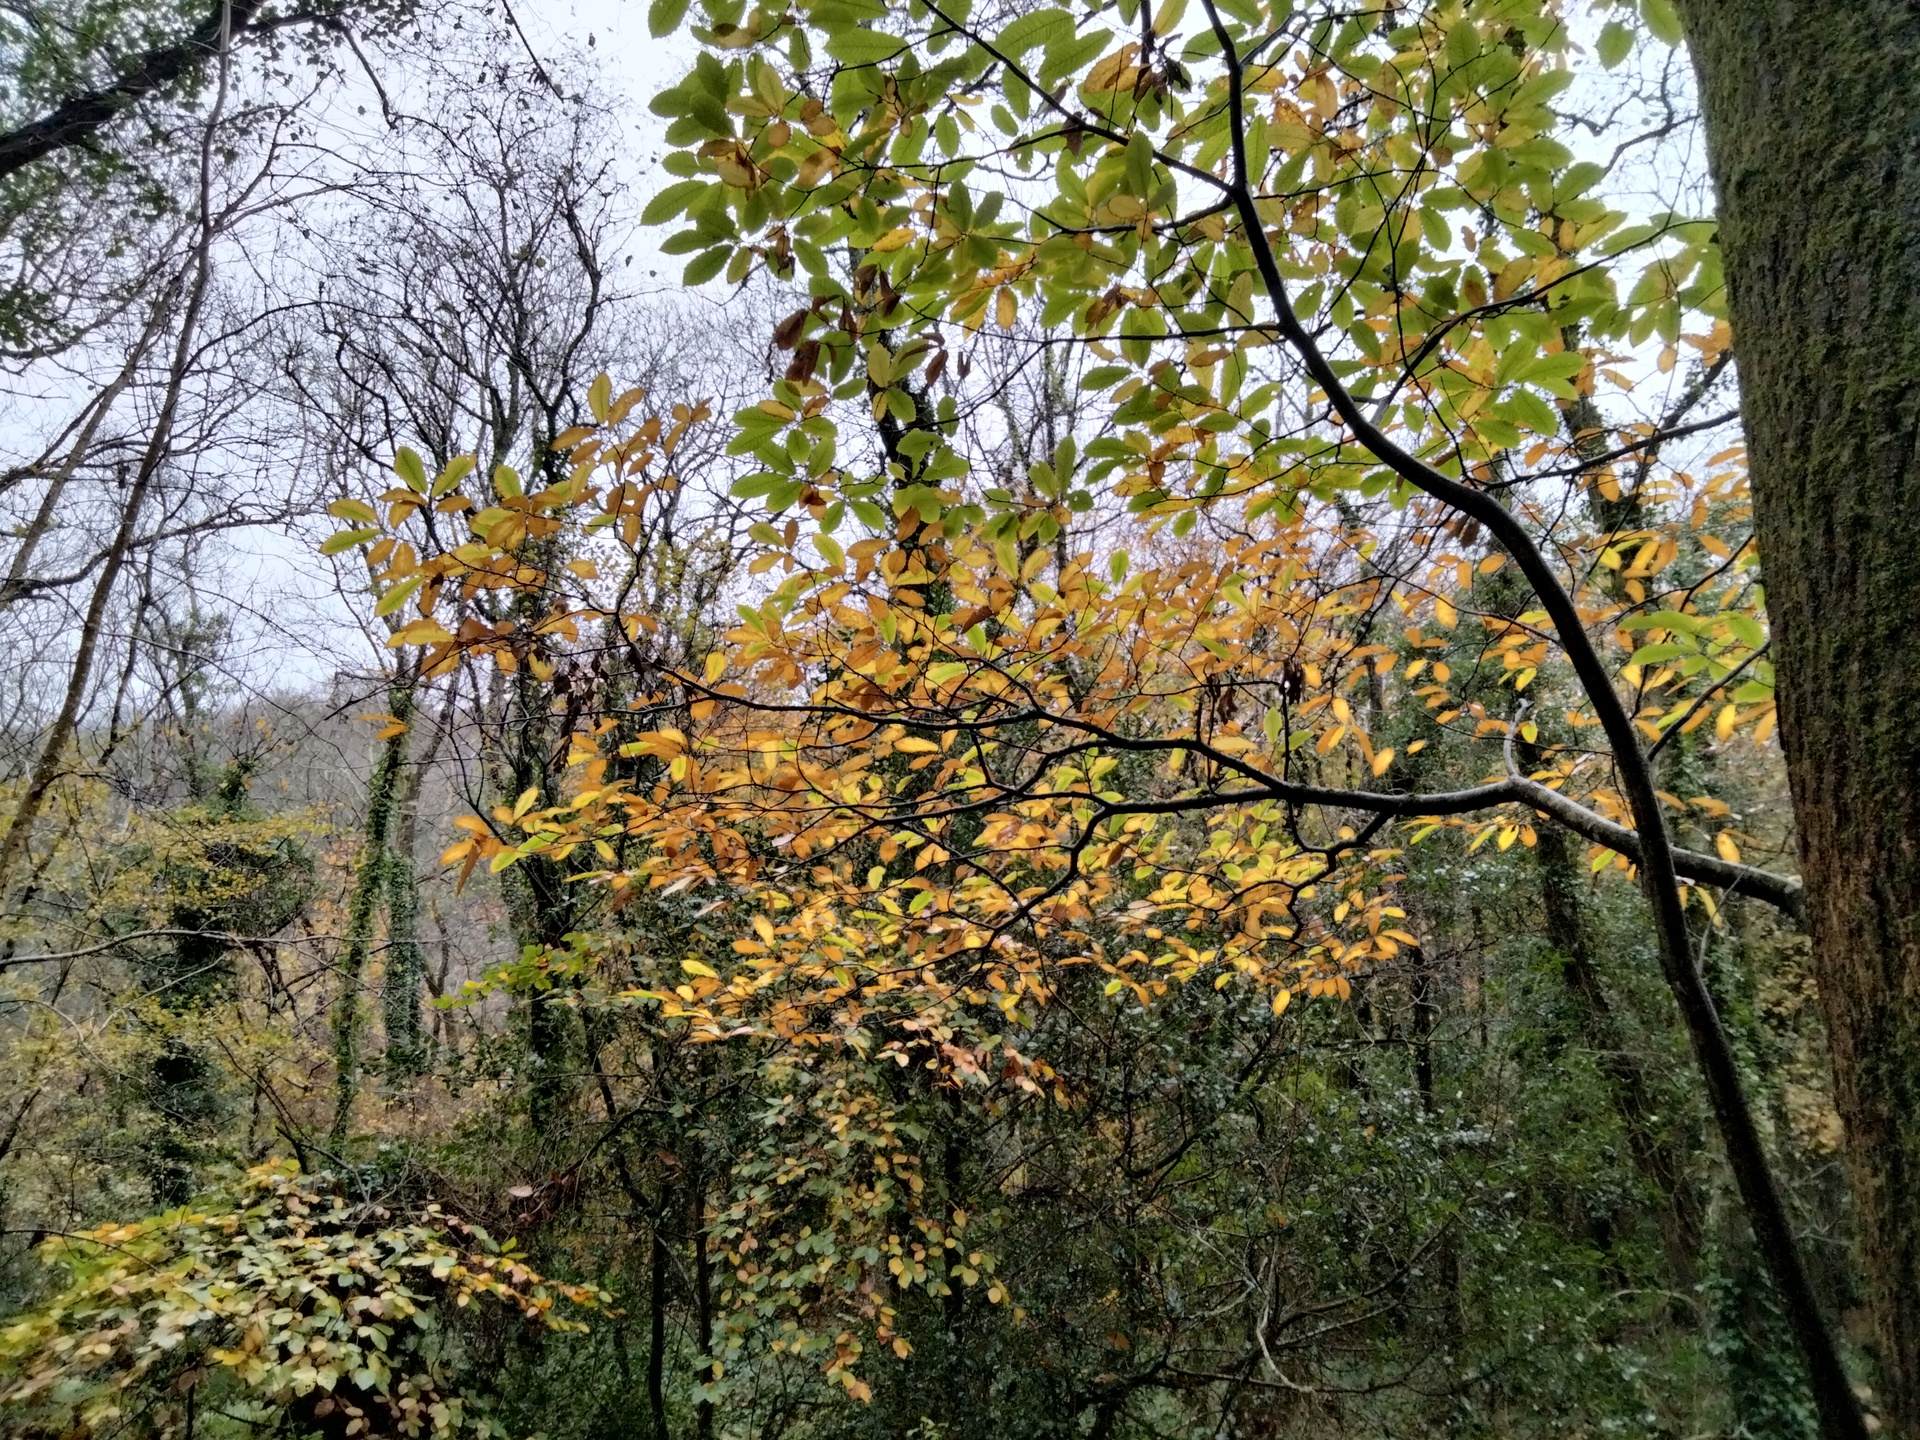 OnePlus Nord N100 photo sample of some yellow leaves